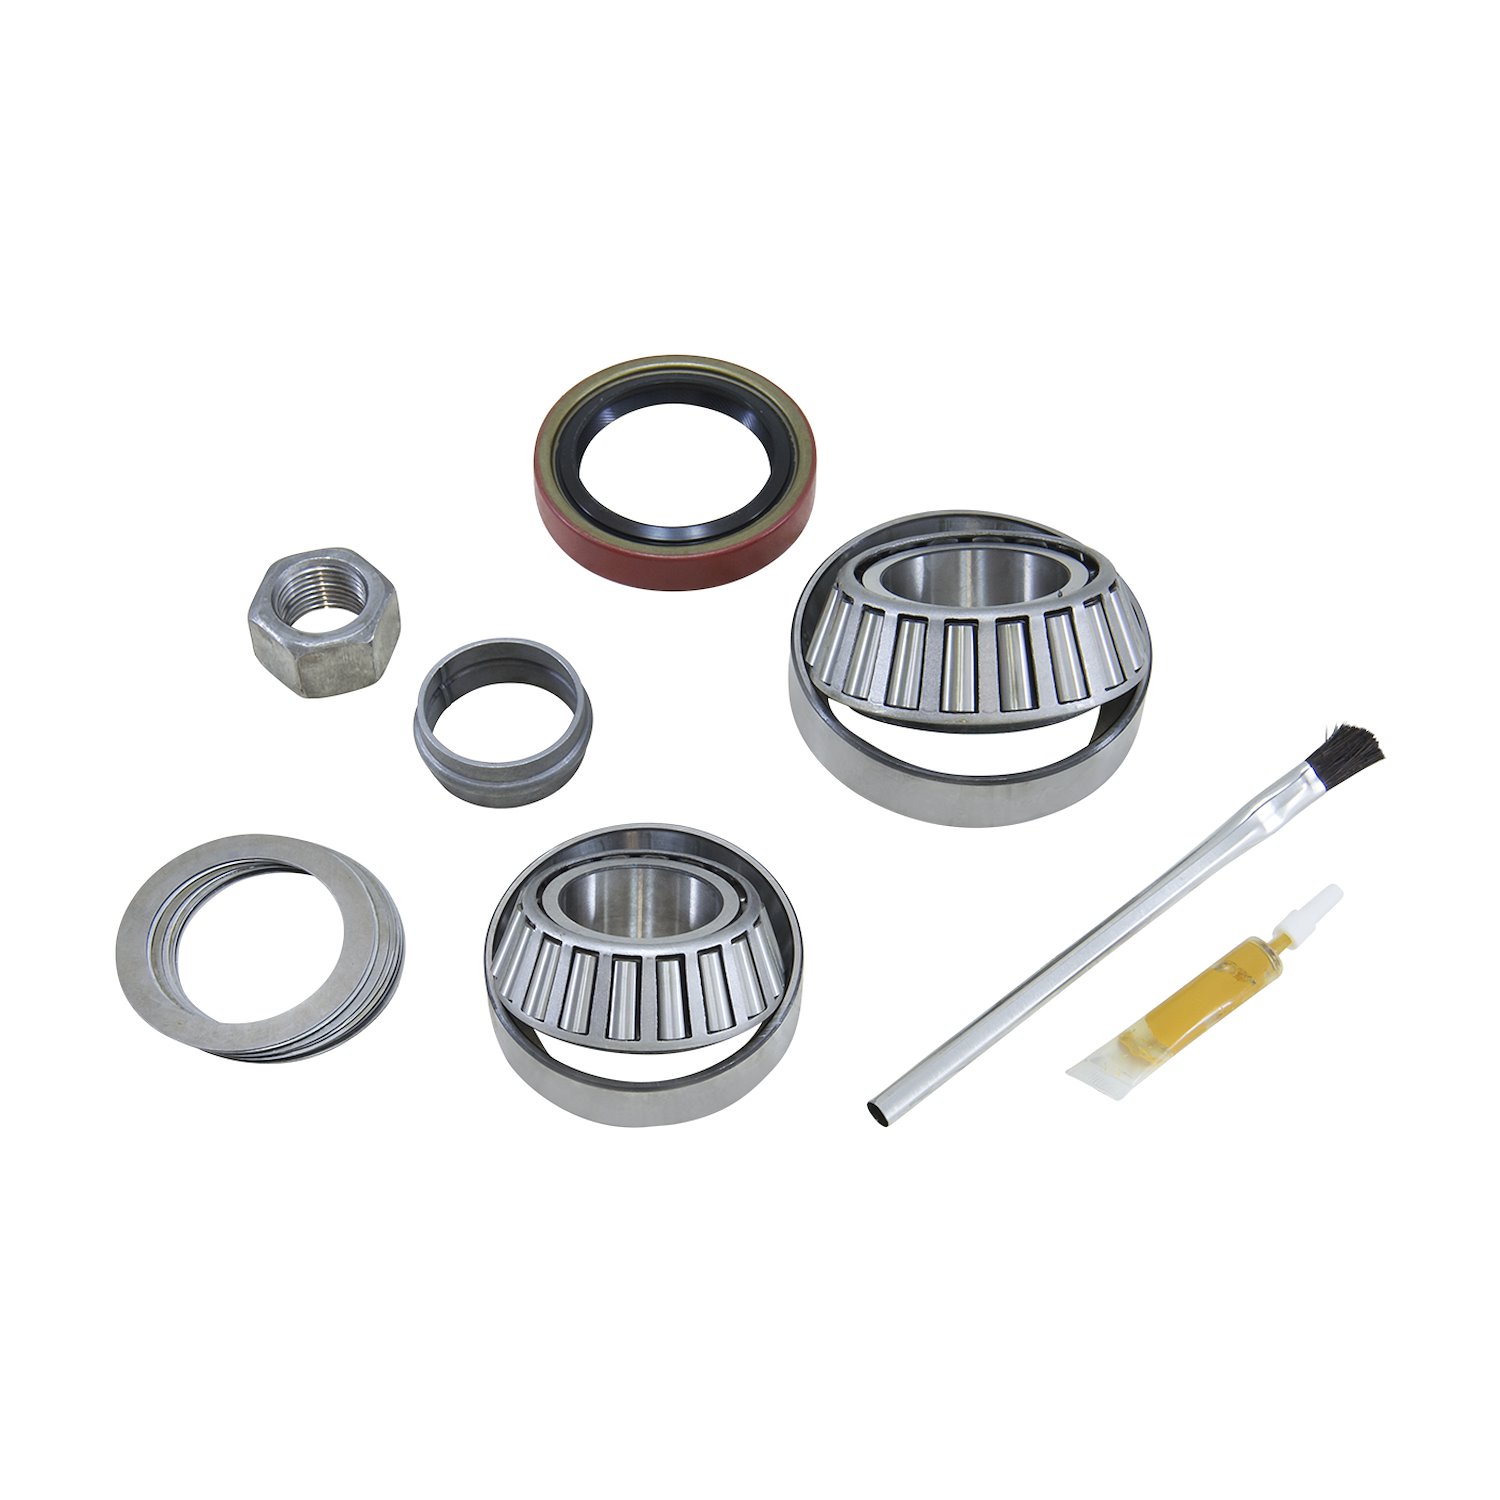 Pinion Install Kit For GM 12 Bolt Car Differential